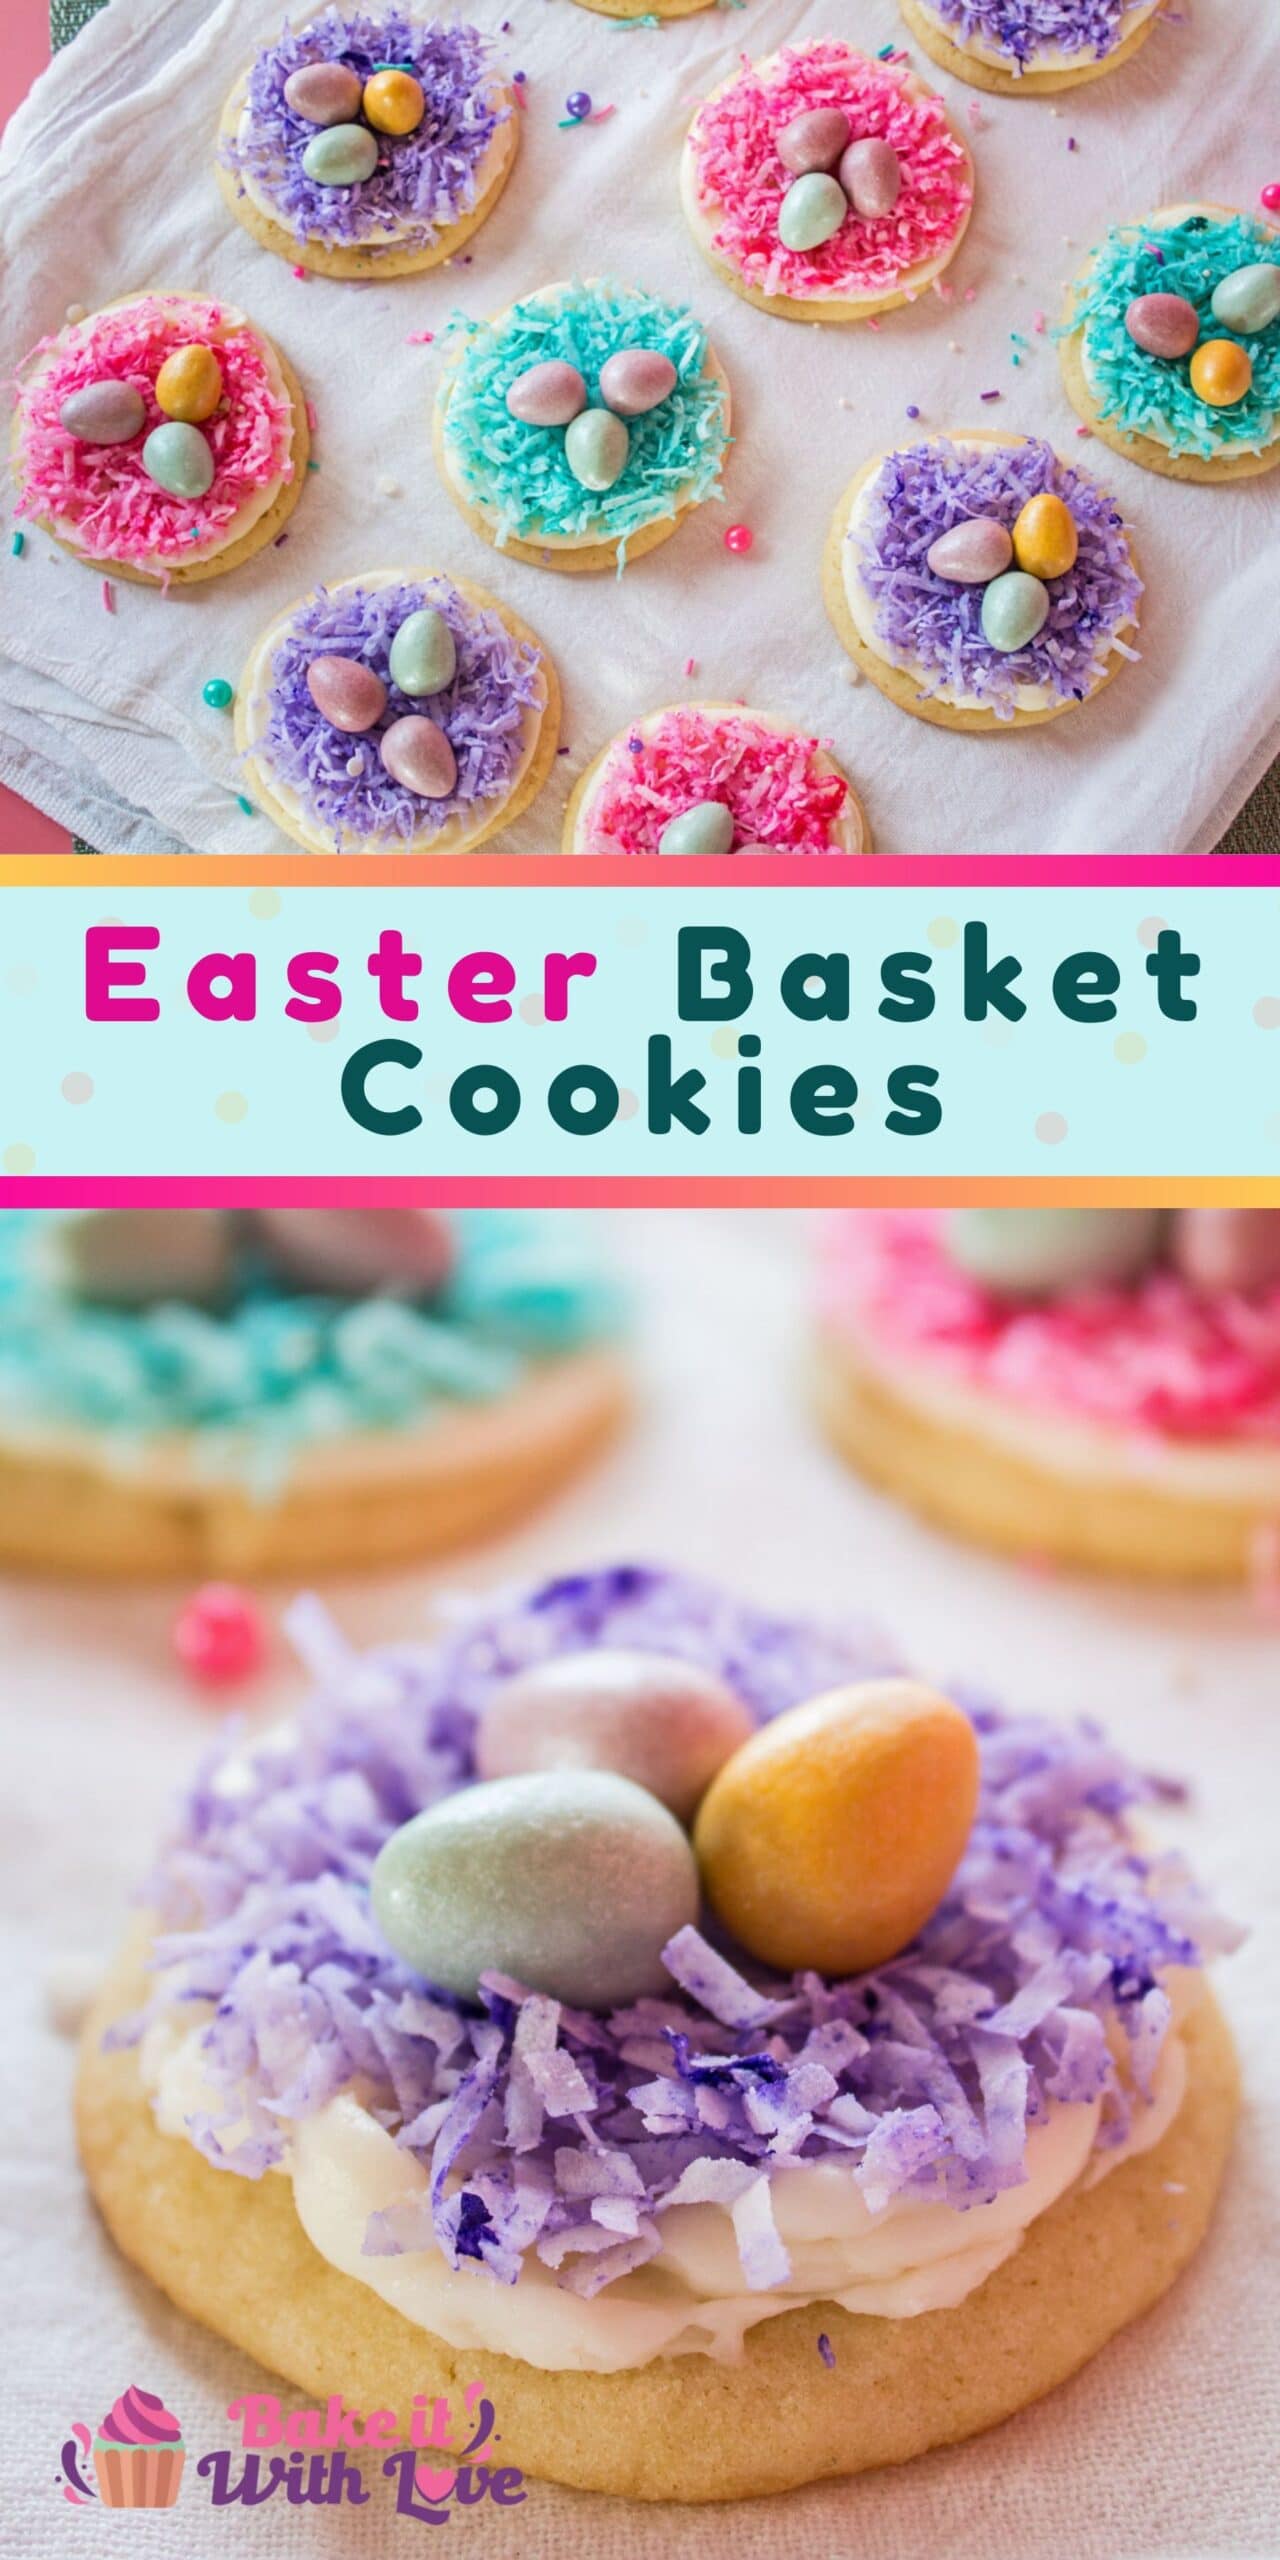 Deliciously fun Easter Basket Cookies are topped with pastel colored shredded coconut and Cadbury's shimmer mini milk chocolate eggs!